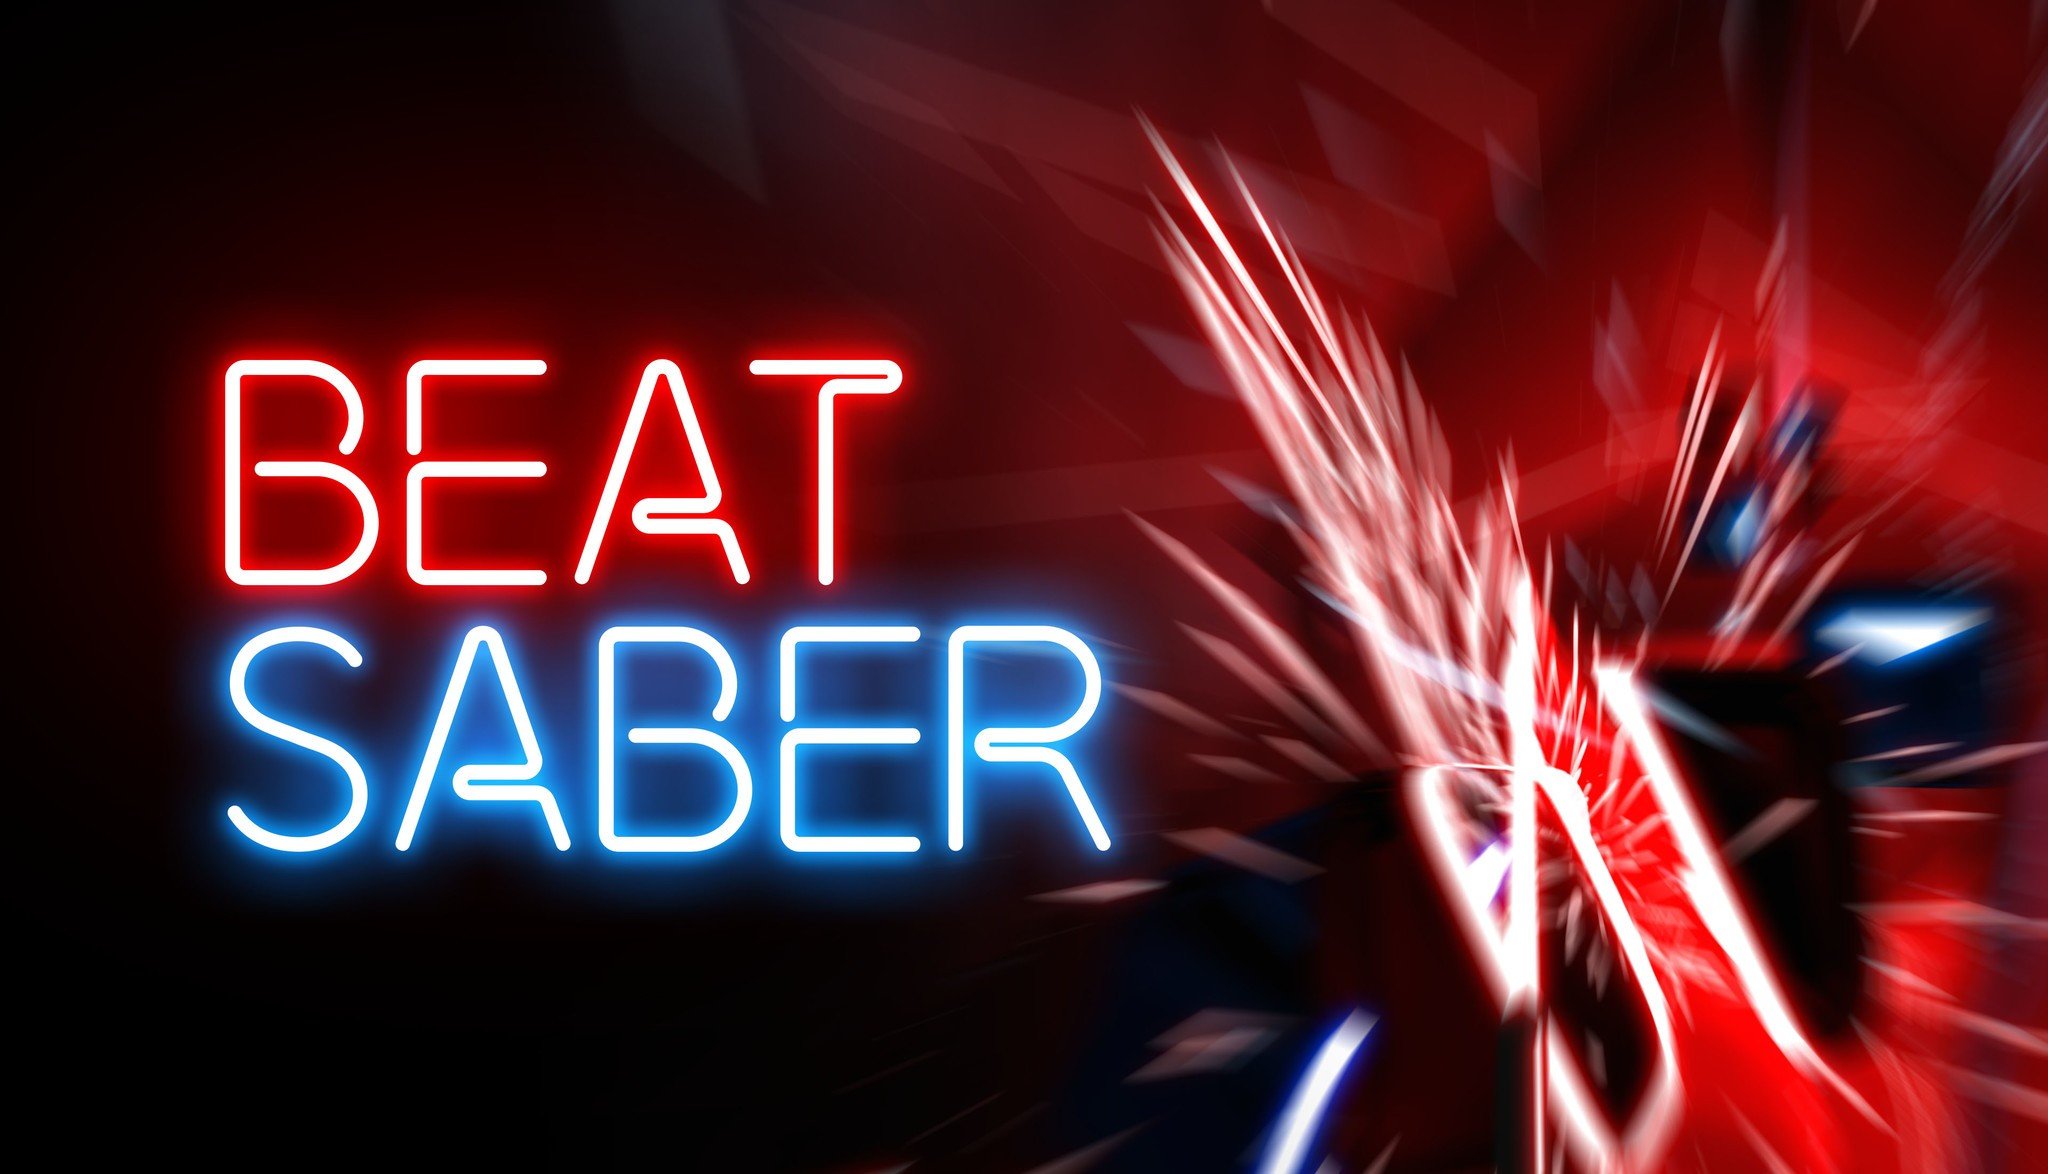 Beat Saber Everything You Need To Know About The Vr Rhythm Game